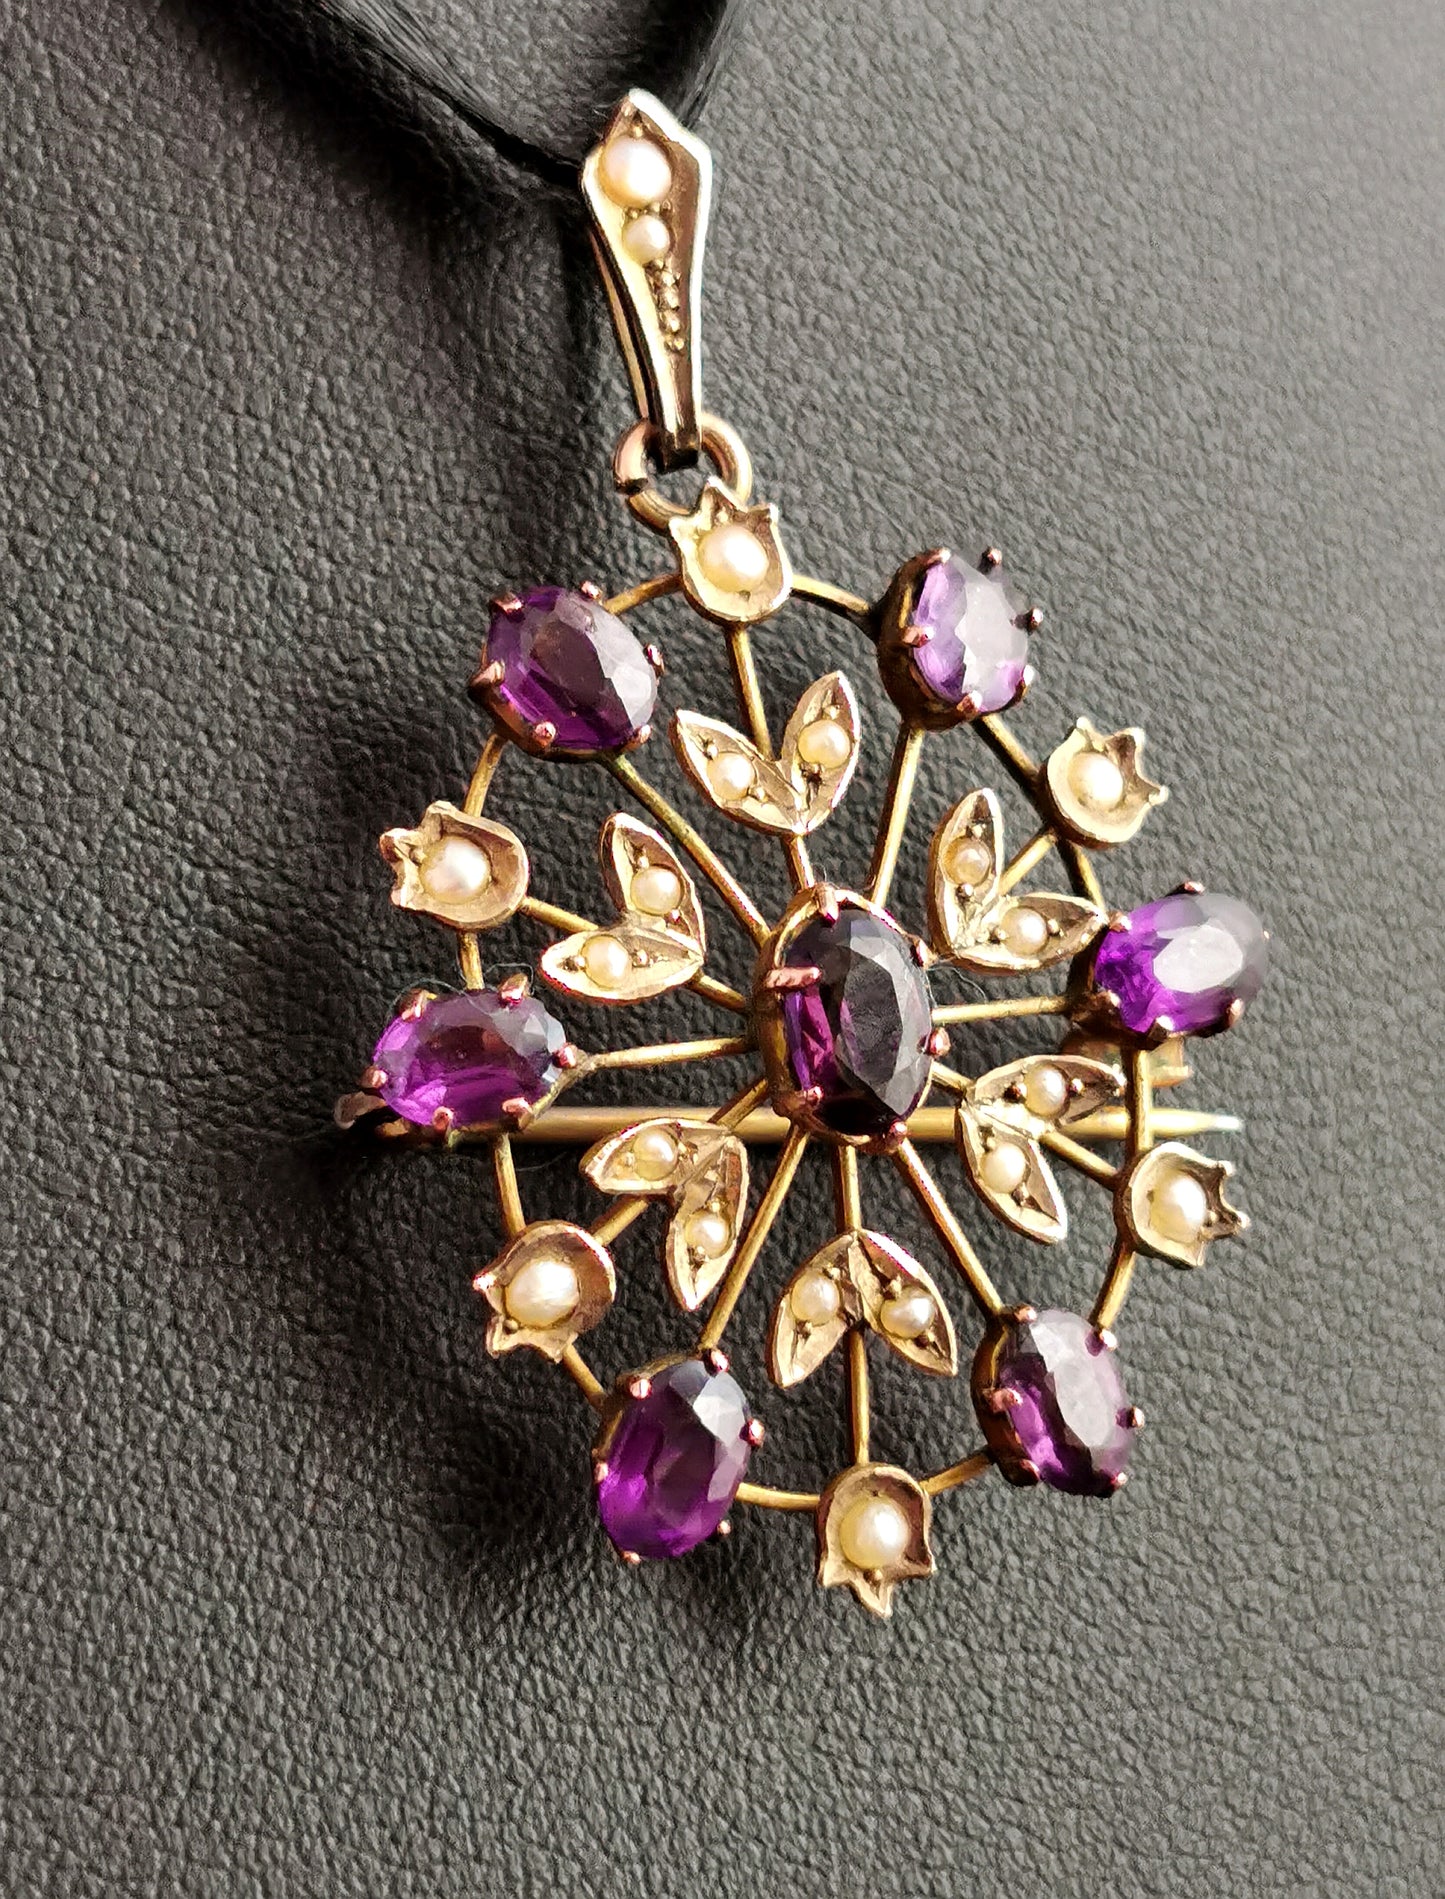 Antique Art Nouveau Amethyst and pearl pendant brooch, Floral Starburst, 9ct gold